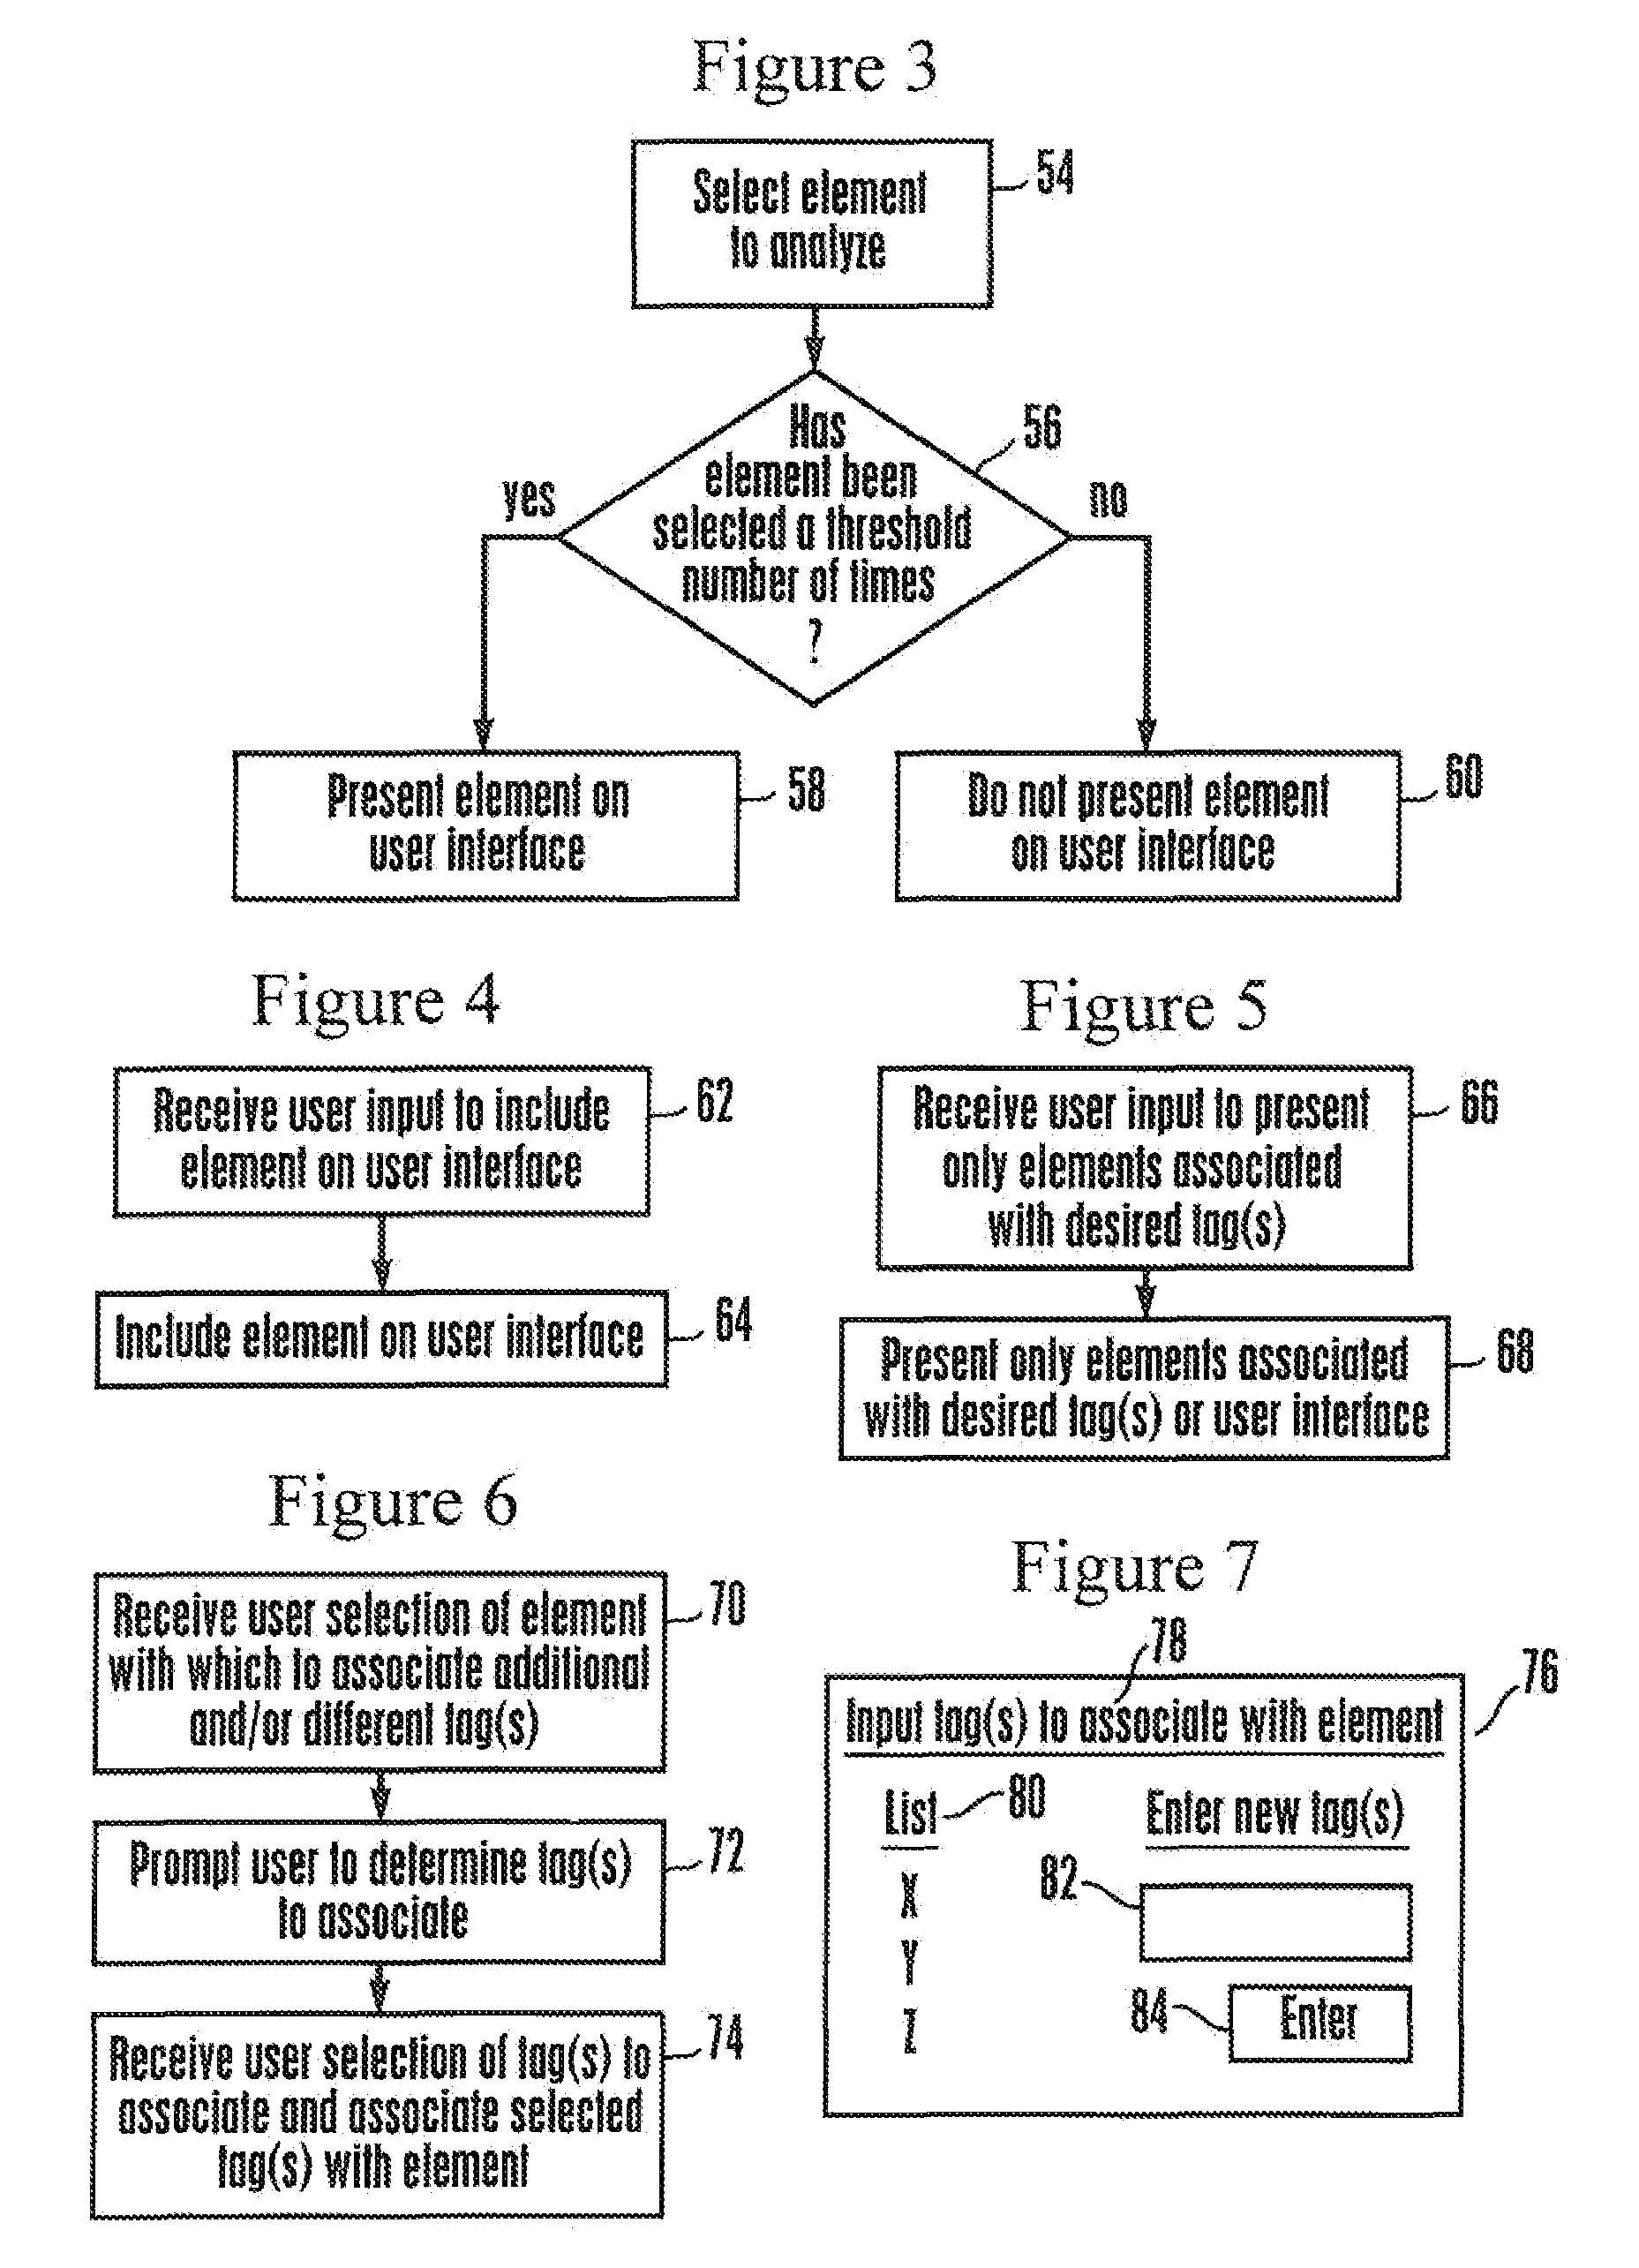 Apparatus and method for presenting menu items on user interface of consumer electronics device